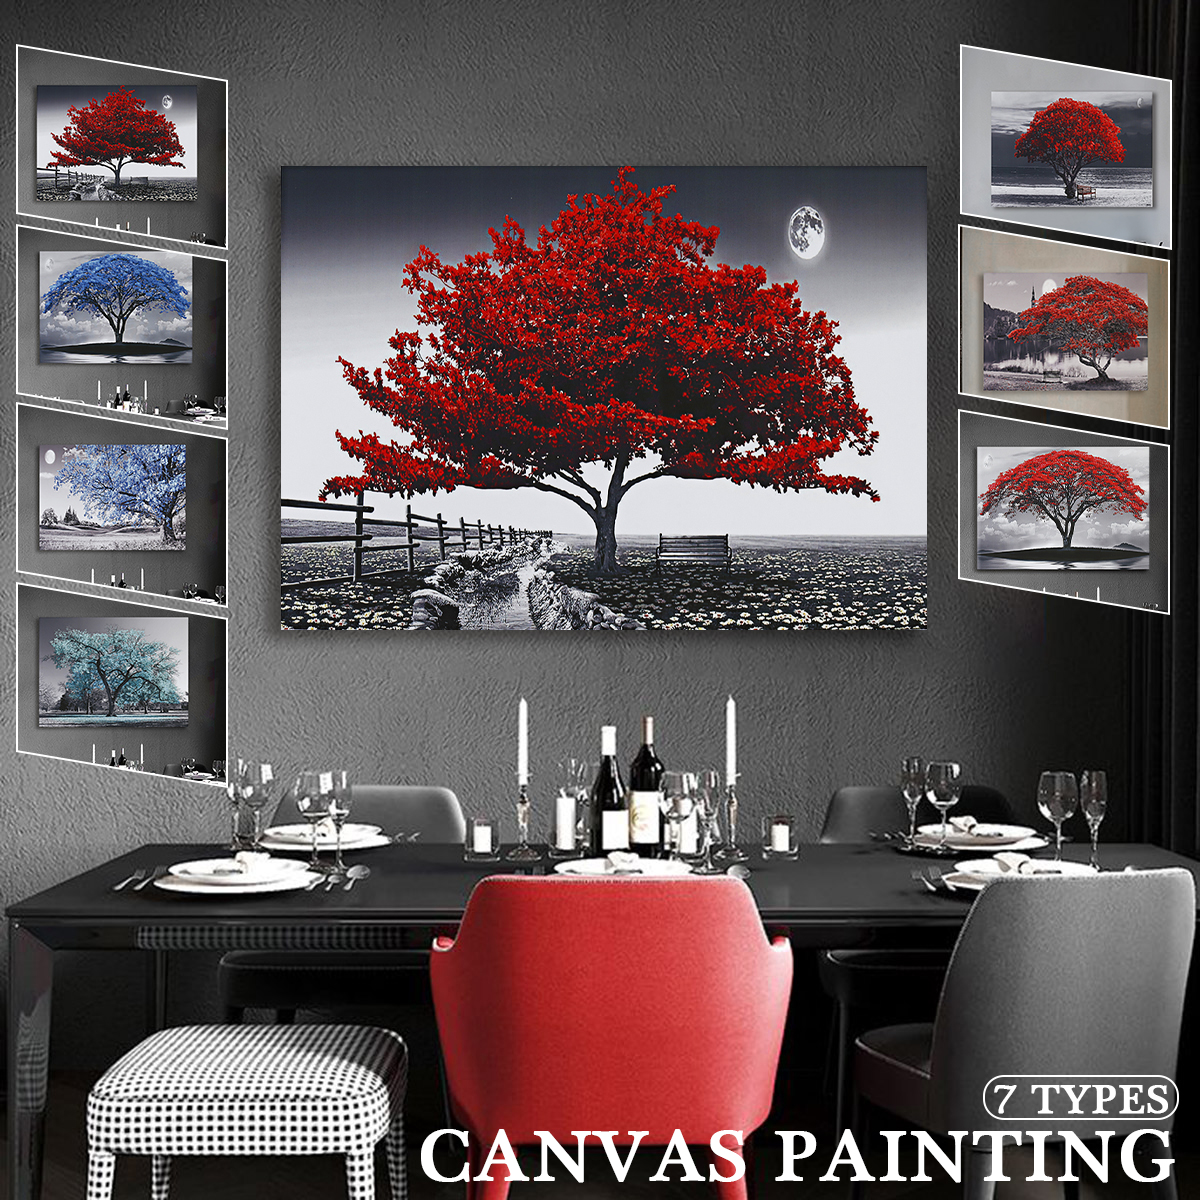 1-Piece-Big-Tree-Canvas-Painting-Wall-Decorative-Print-Art-Picture-Unframed-Wall-Hanging-Home-Office-1785043-1